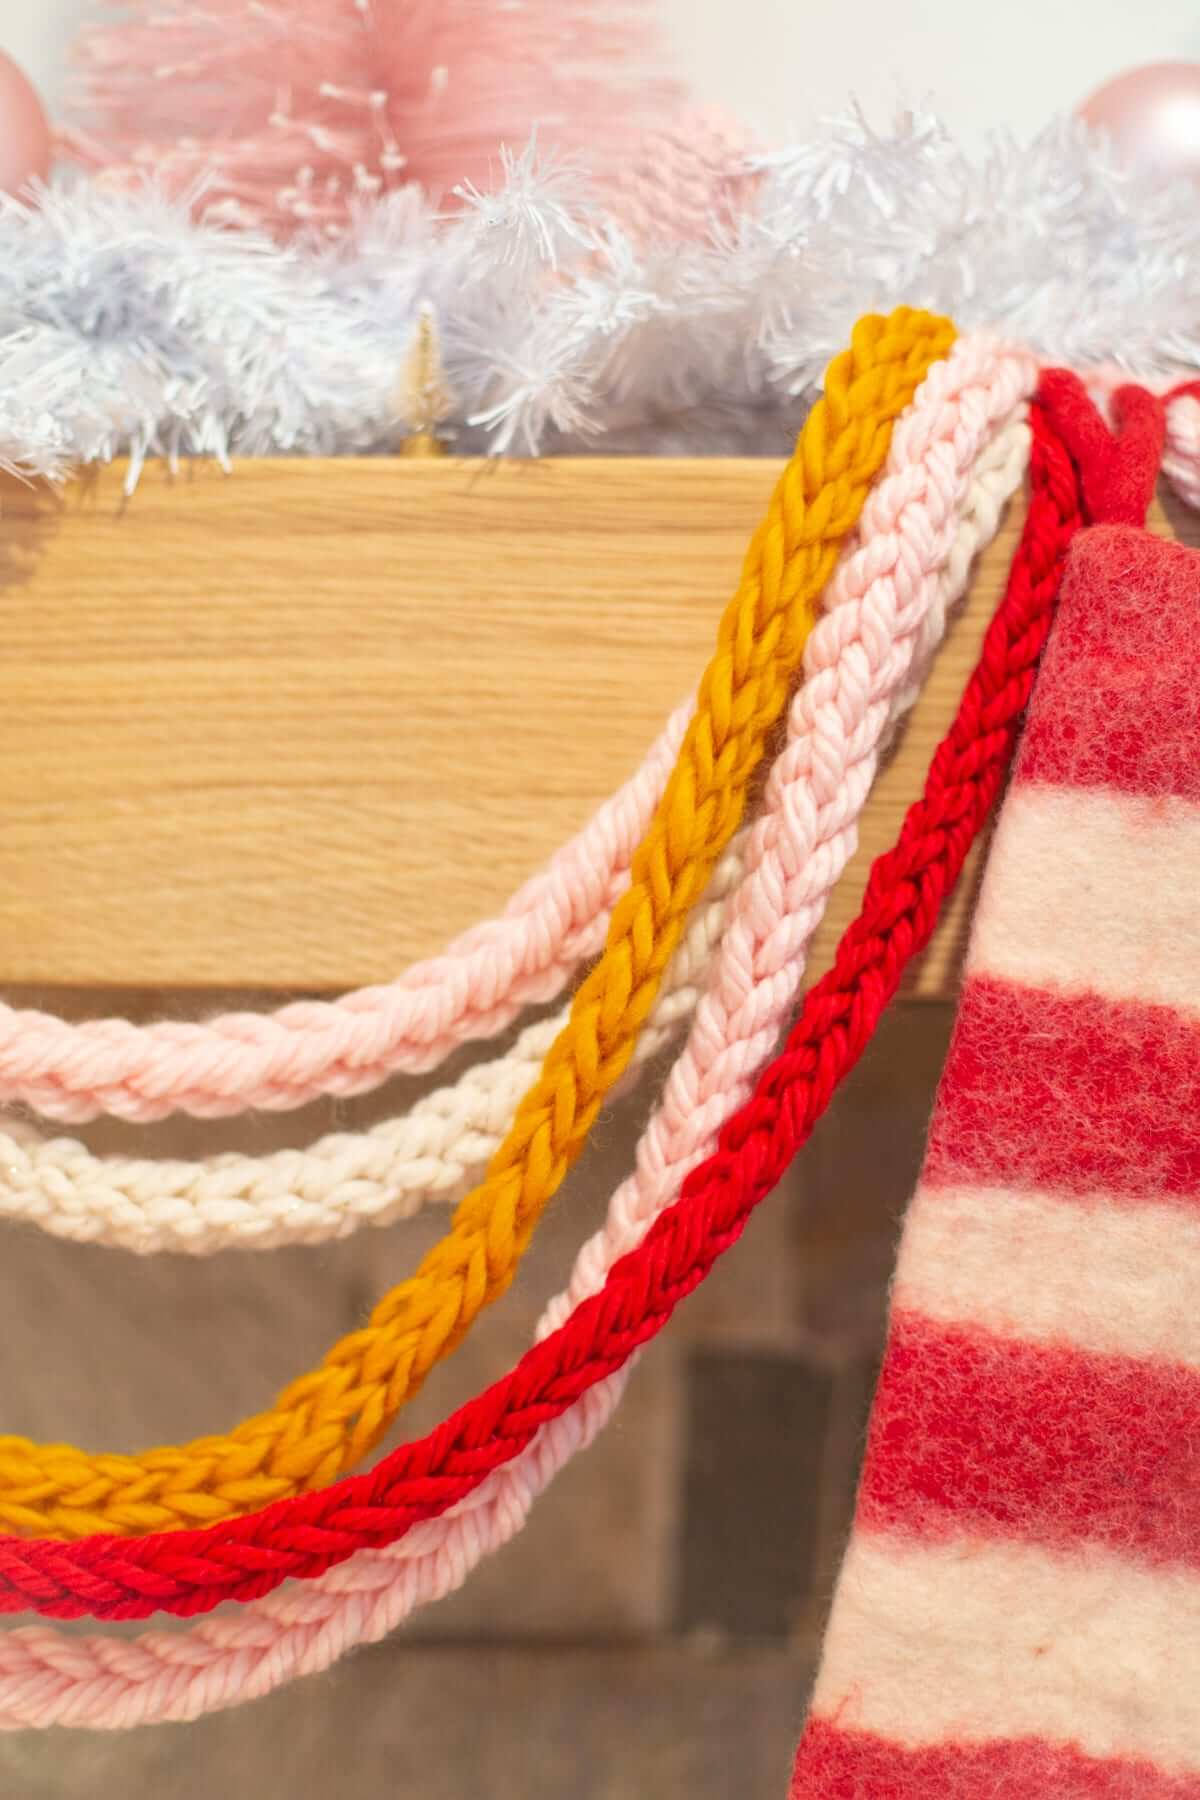 Simple Finger Knitted Garland Making Idea For Wall DecorThings to do with yarn and fingers 